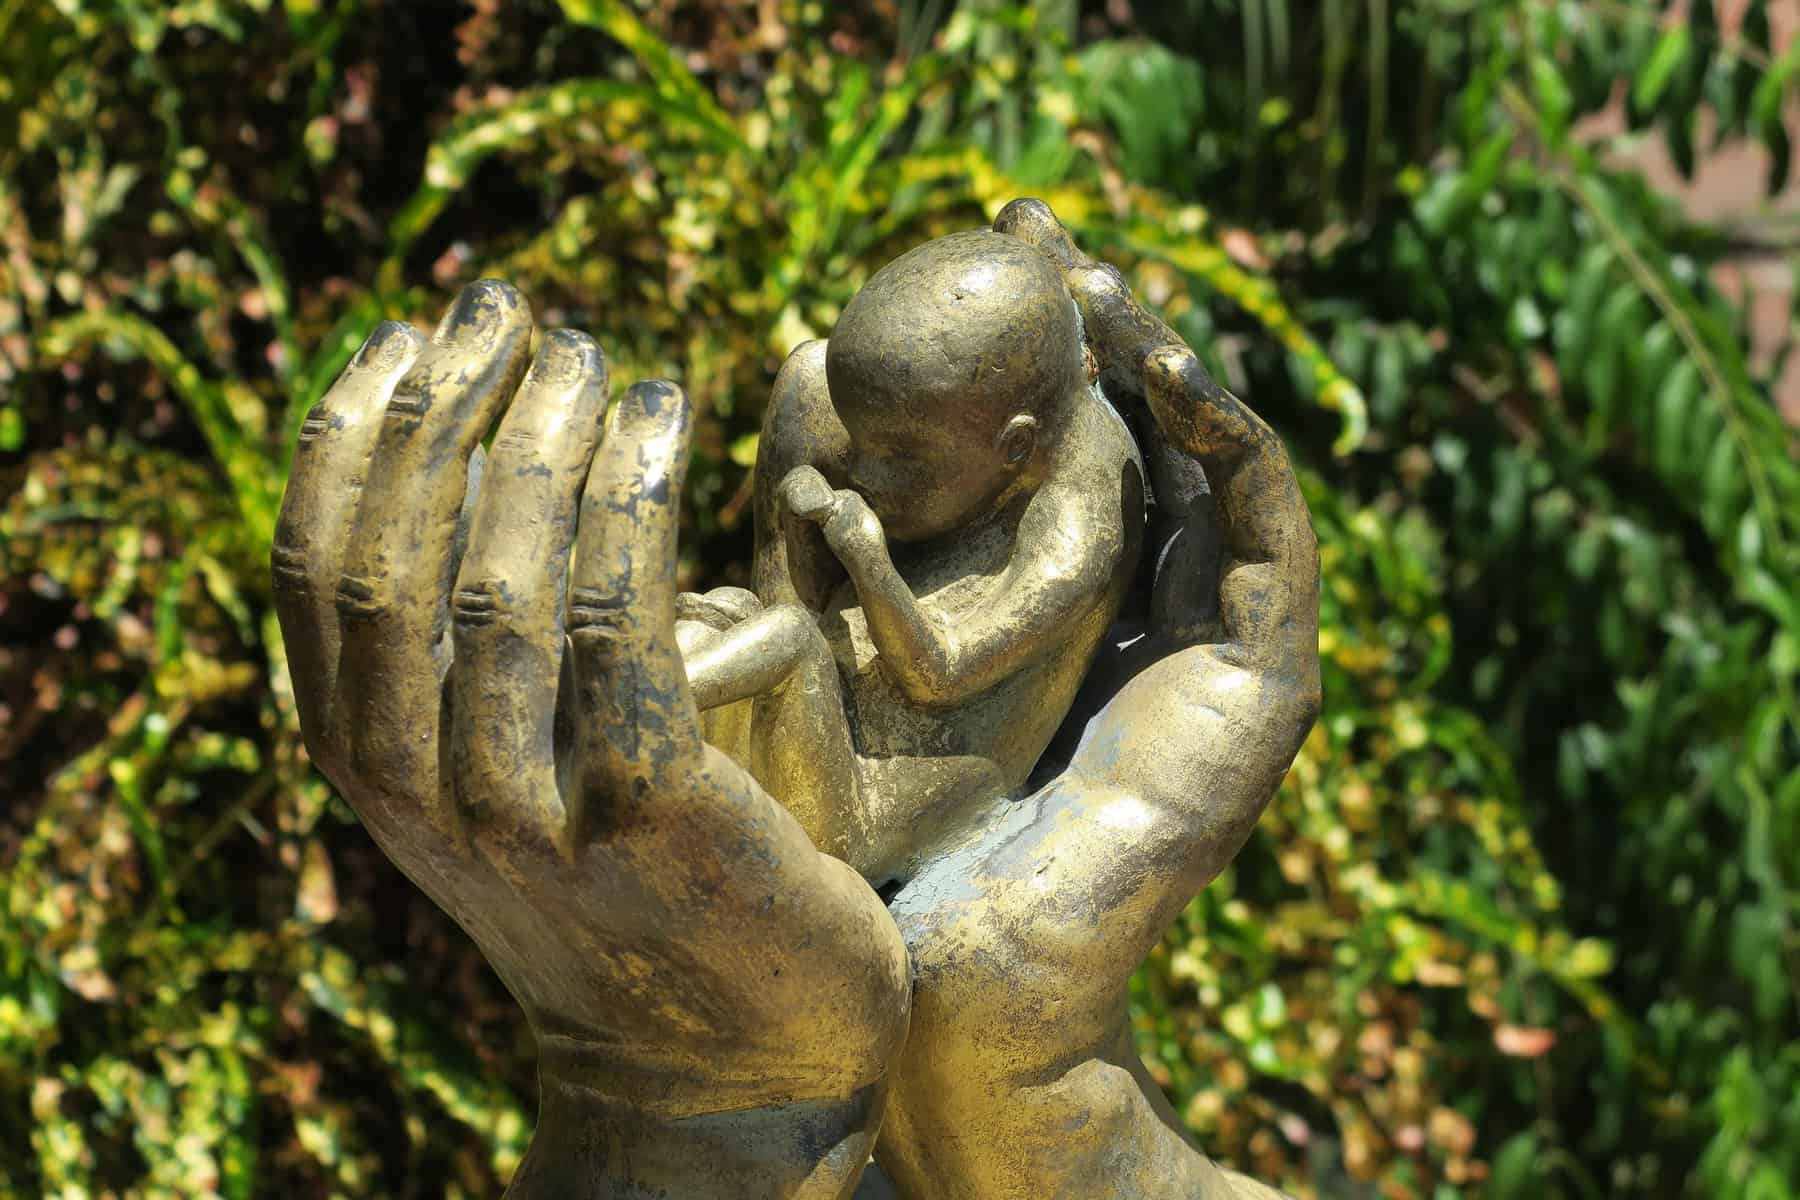 Hands of a sculpture are shown wrist together and holding a tiny baby.